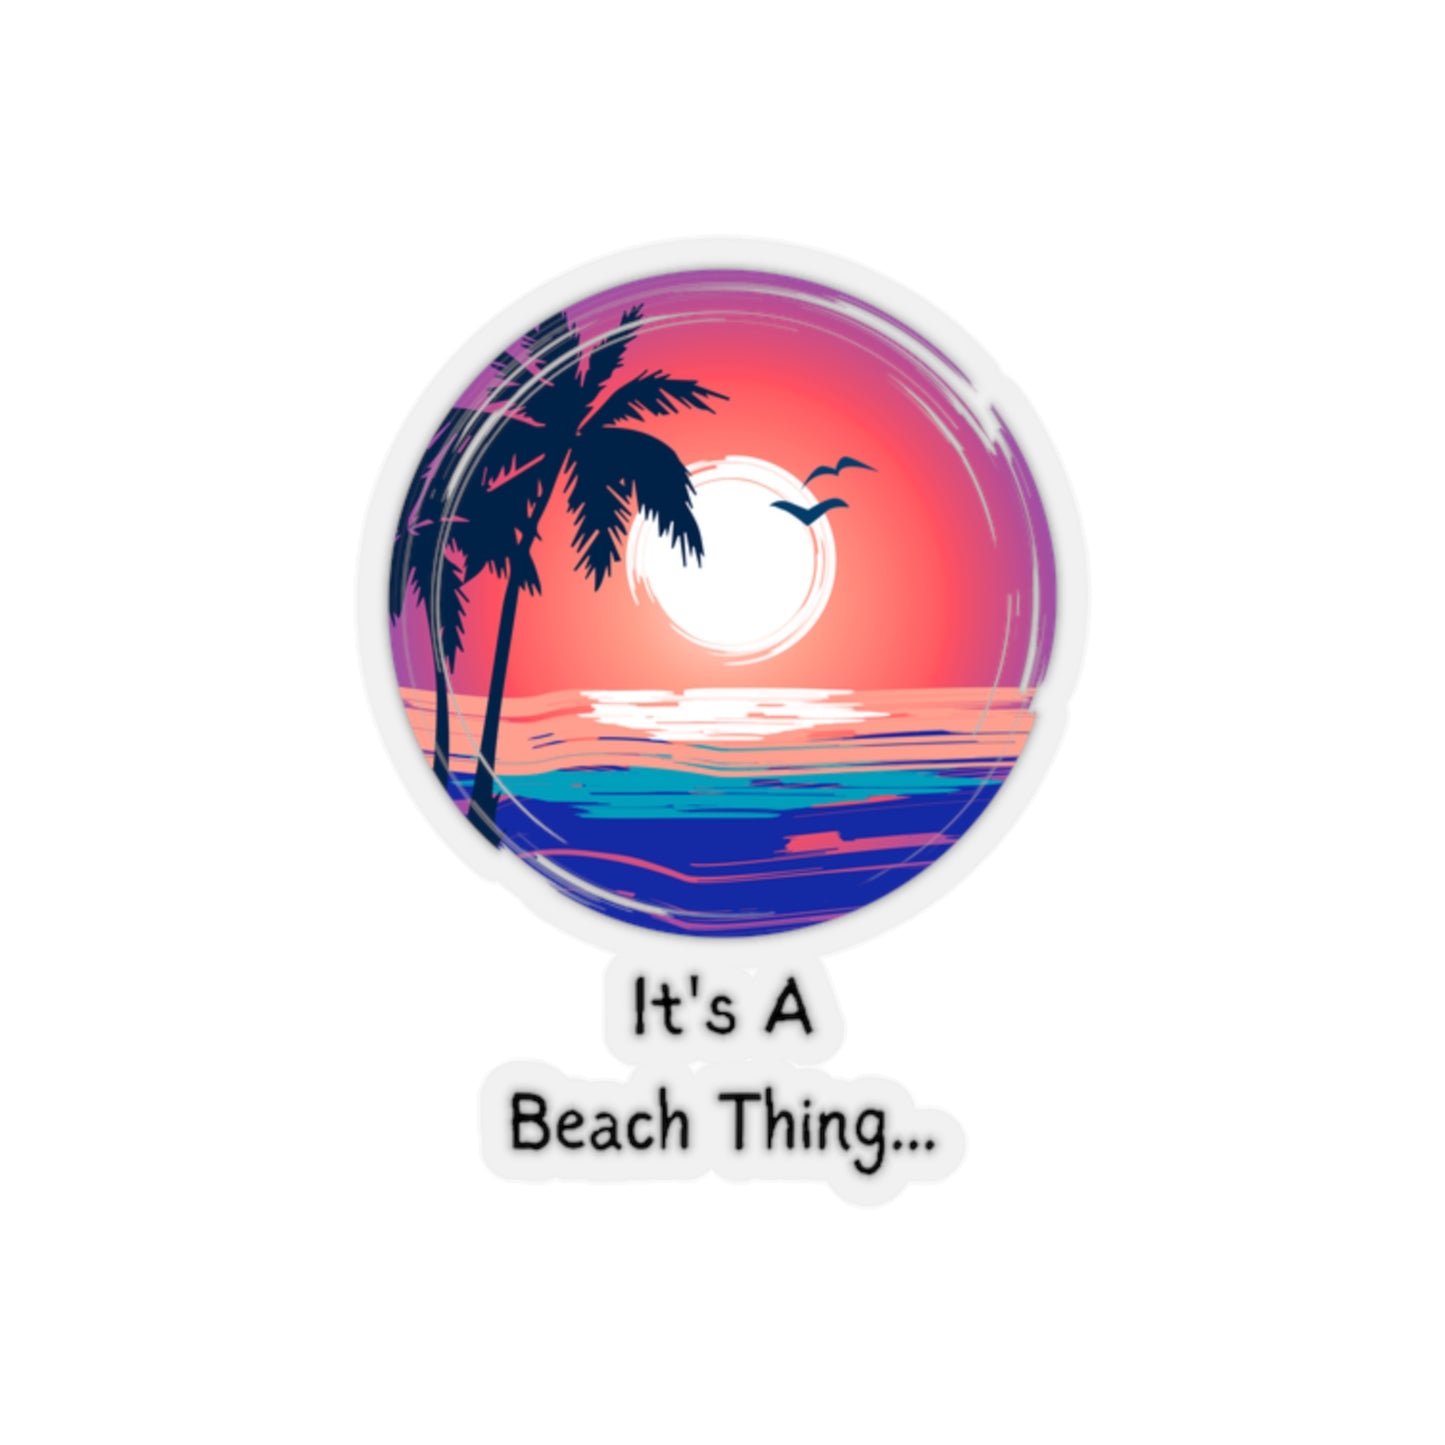 It's A Beach Thing Sticker Vacation Decal Coastal Living Good Life Vibes Cute Trendy Beachy Sunset - The Good Life Vibe